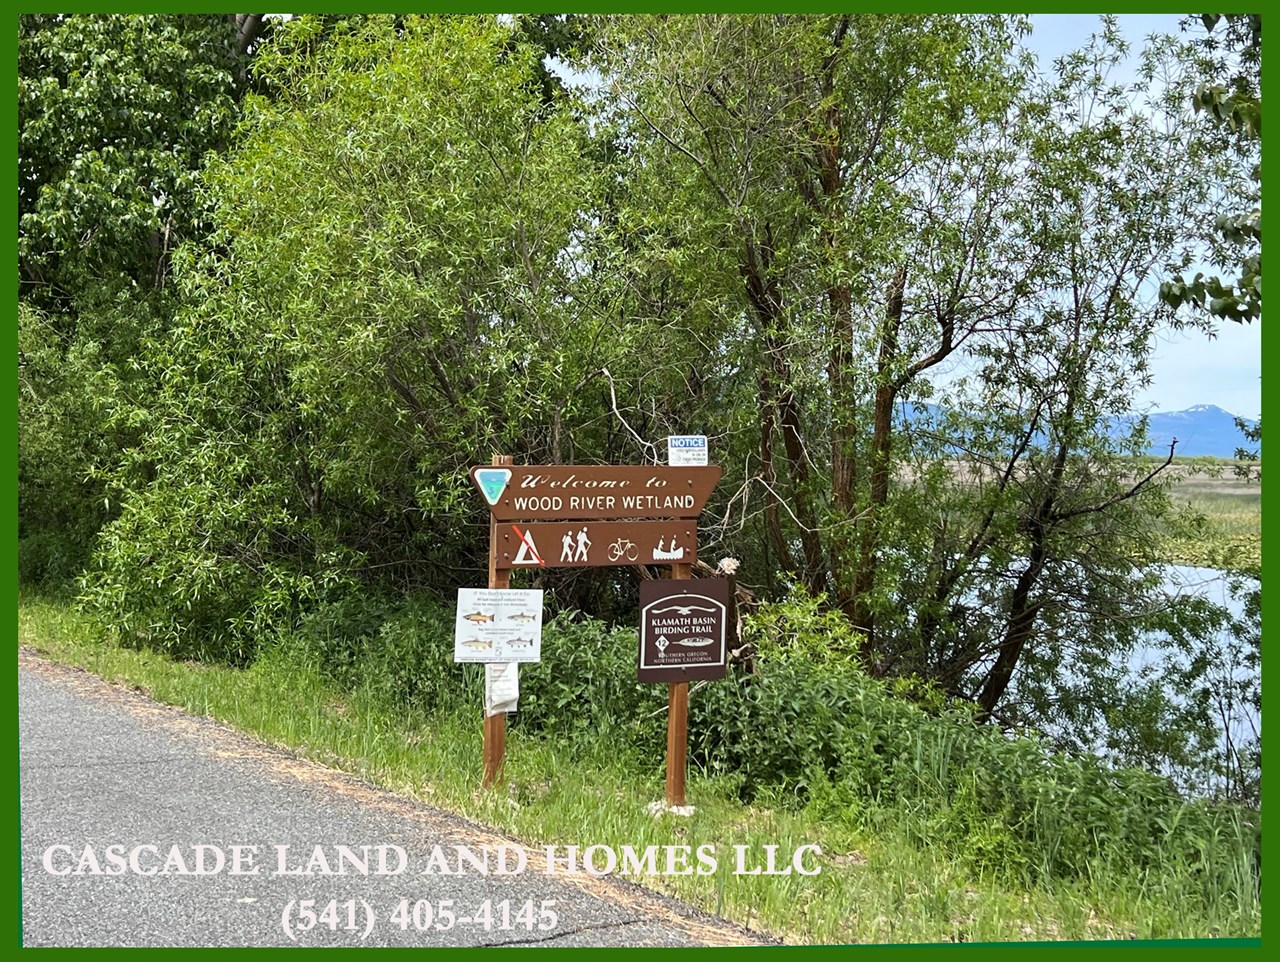 wood river wetlands are close by for wildlife viewing and bird watching.  agency lake is located on the pacific flyway with over 400 different species of birds passing through, including bald eagles, sandhill cranes and pelicans.